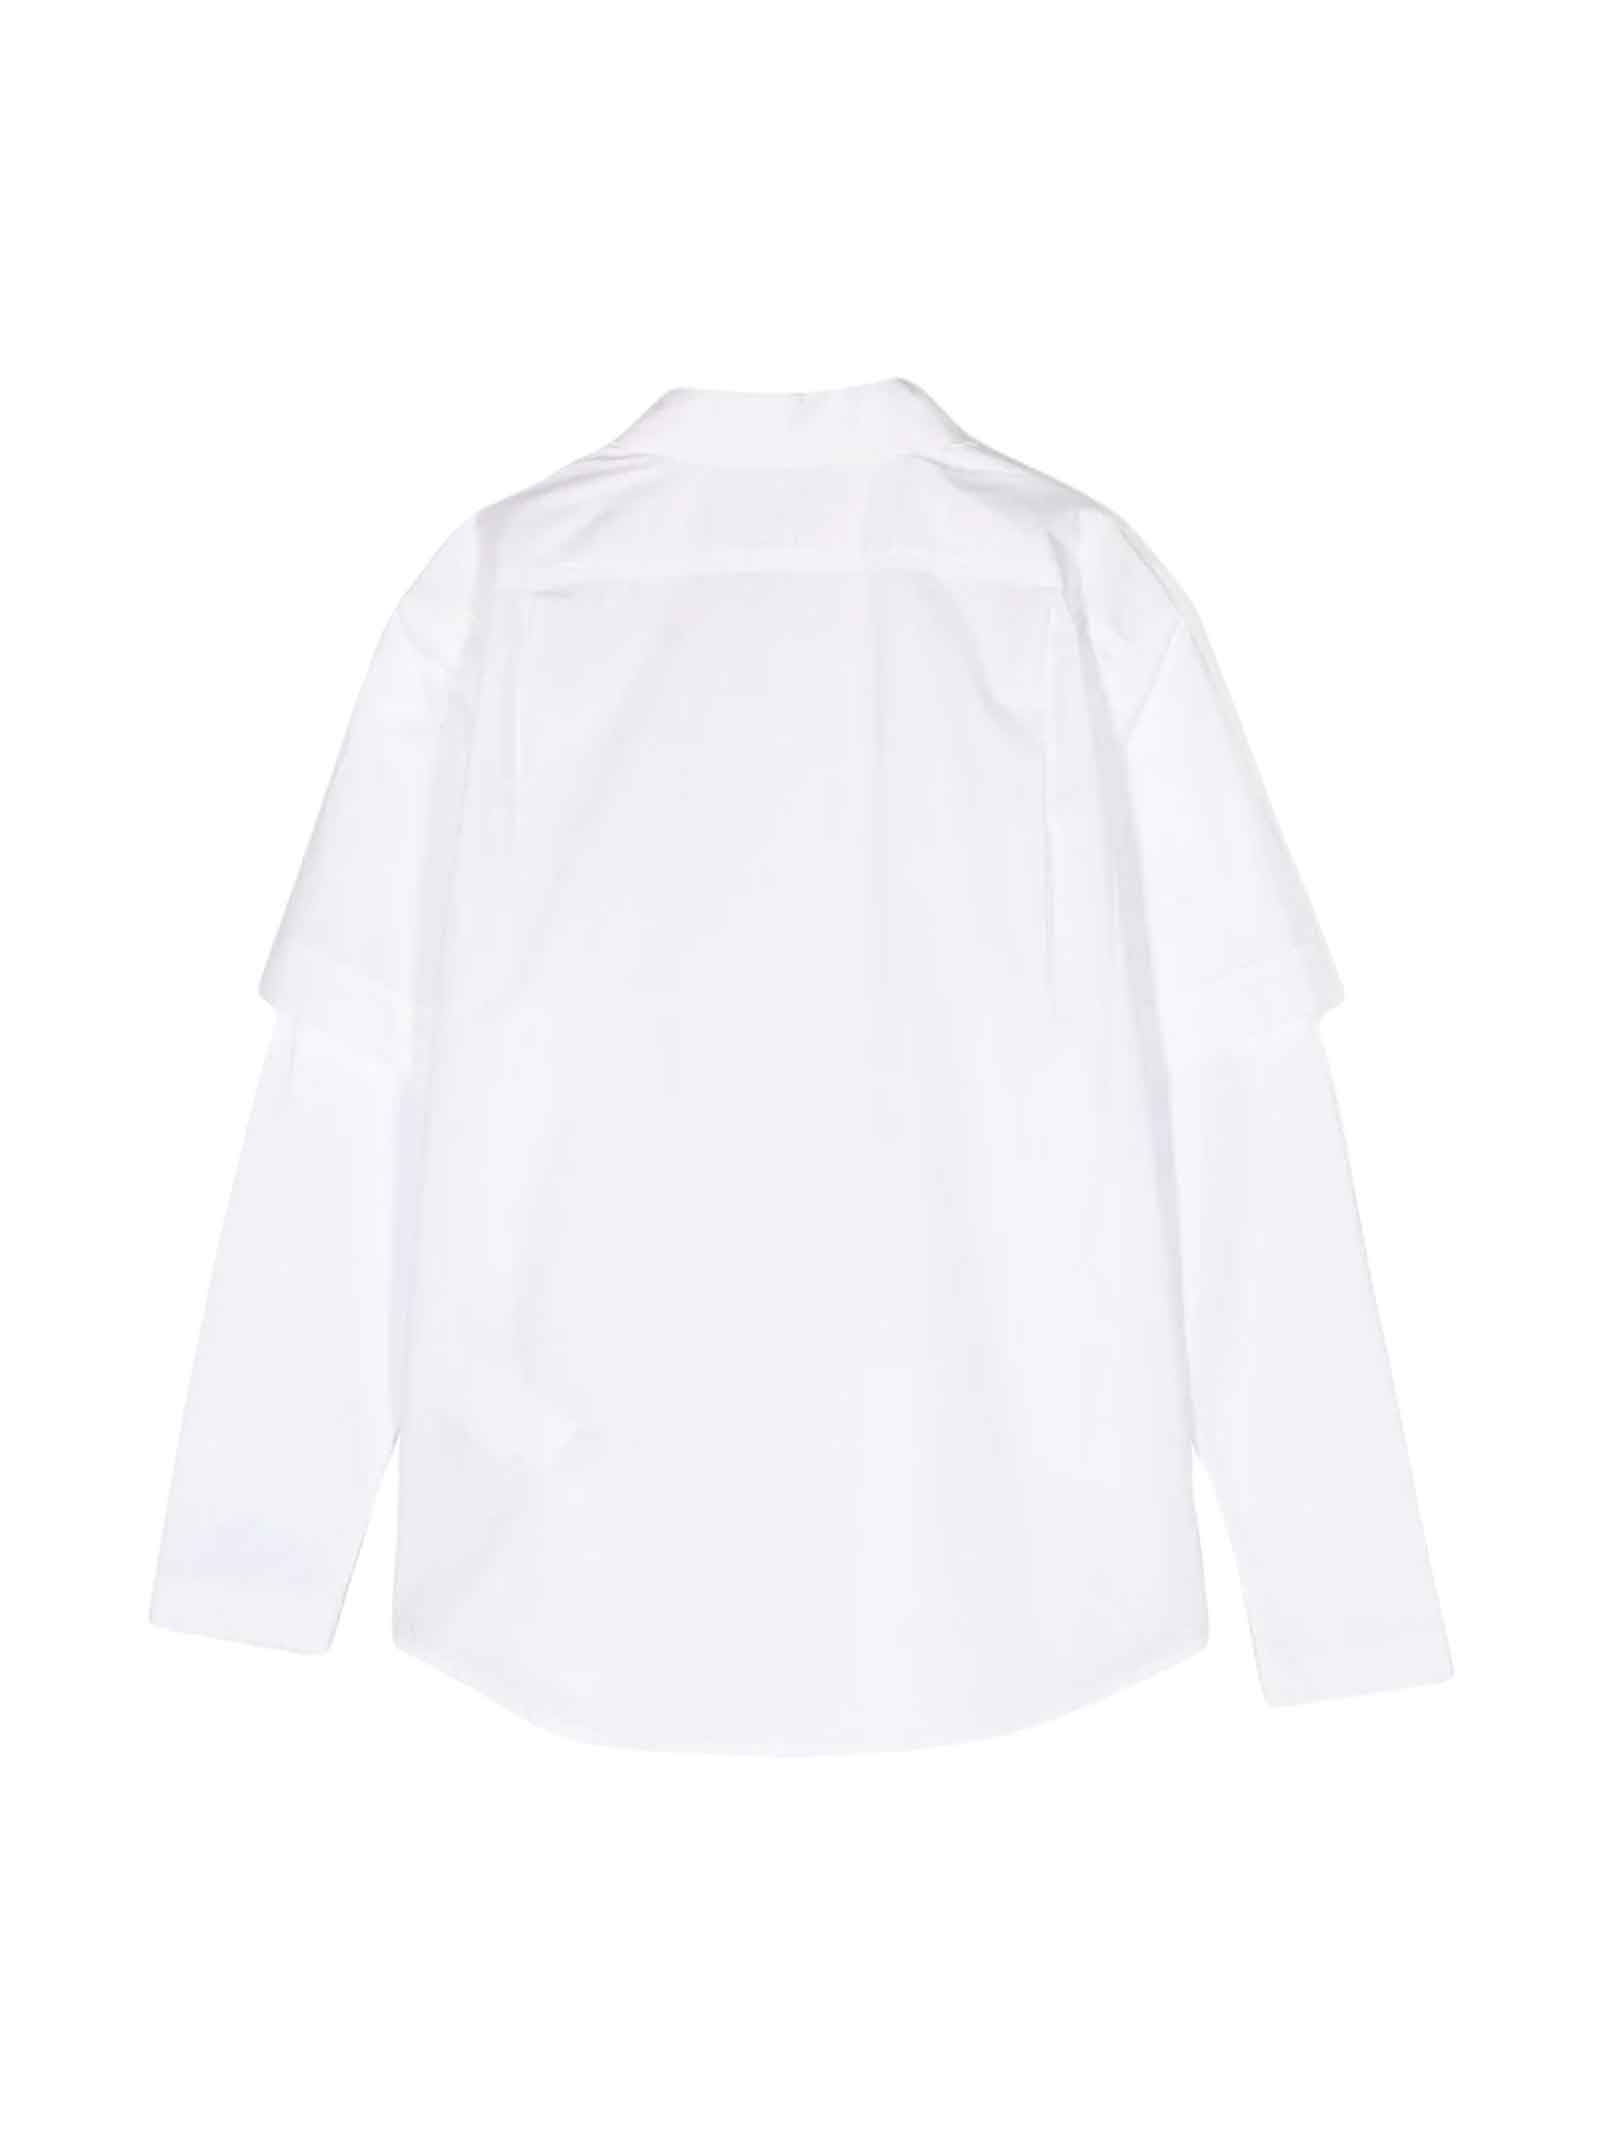 Diesel Kids' White Shirt With Contrasting Knit